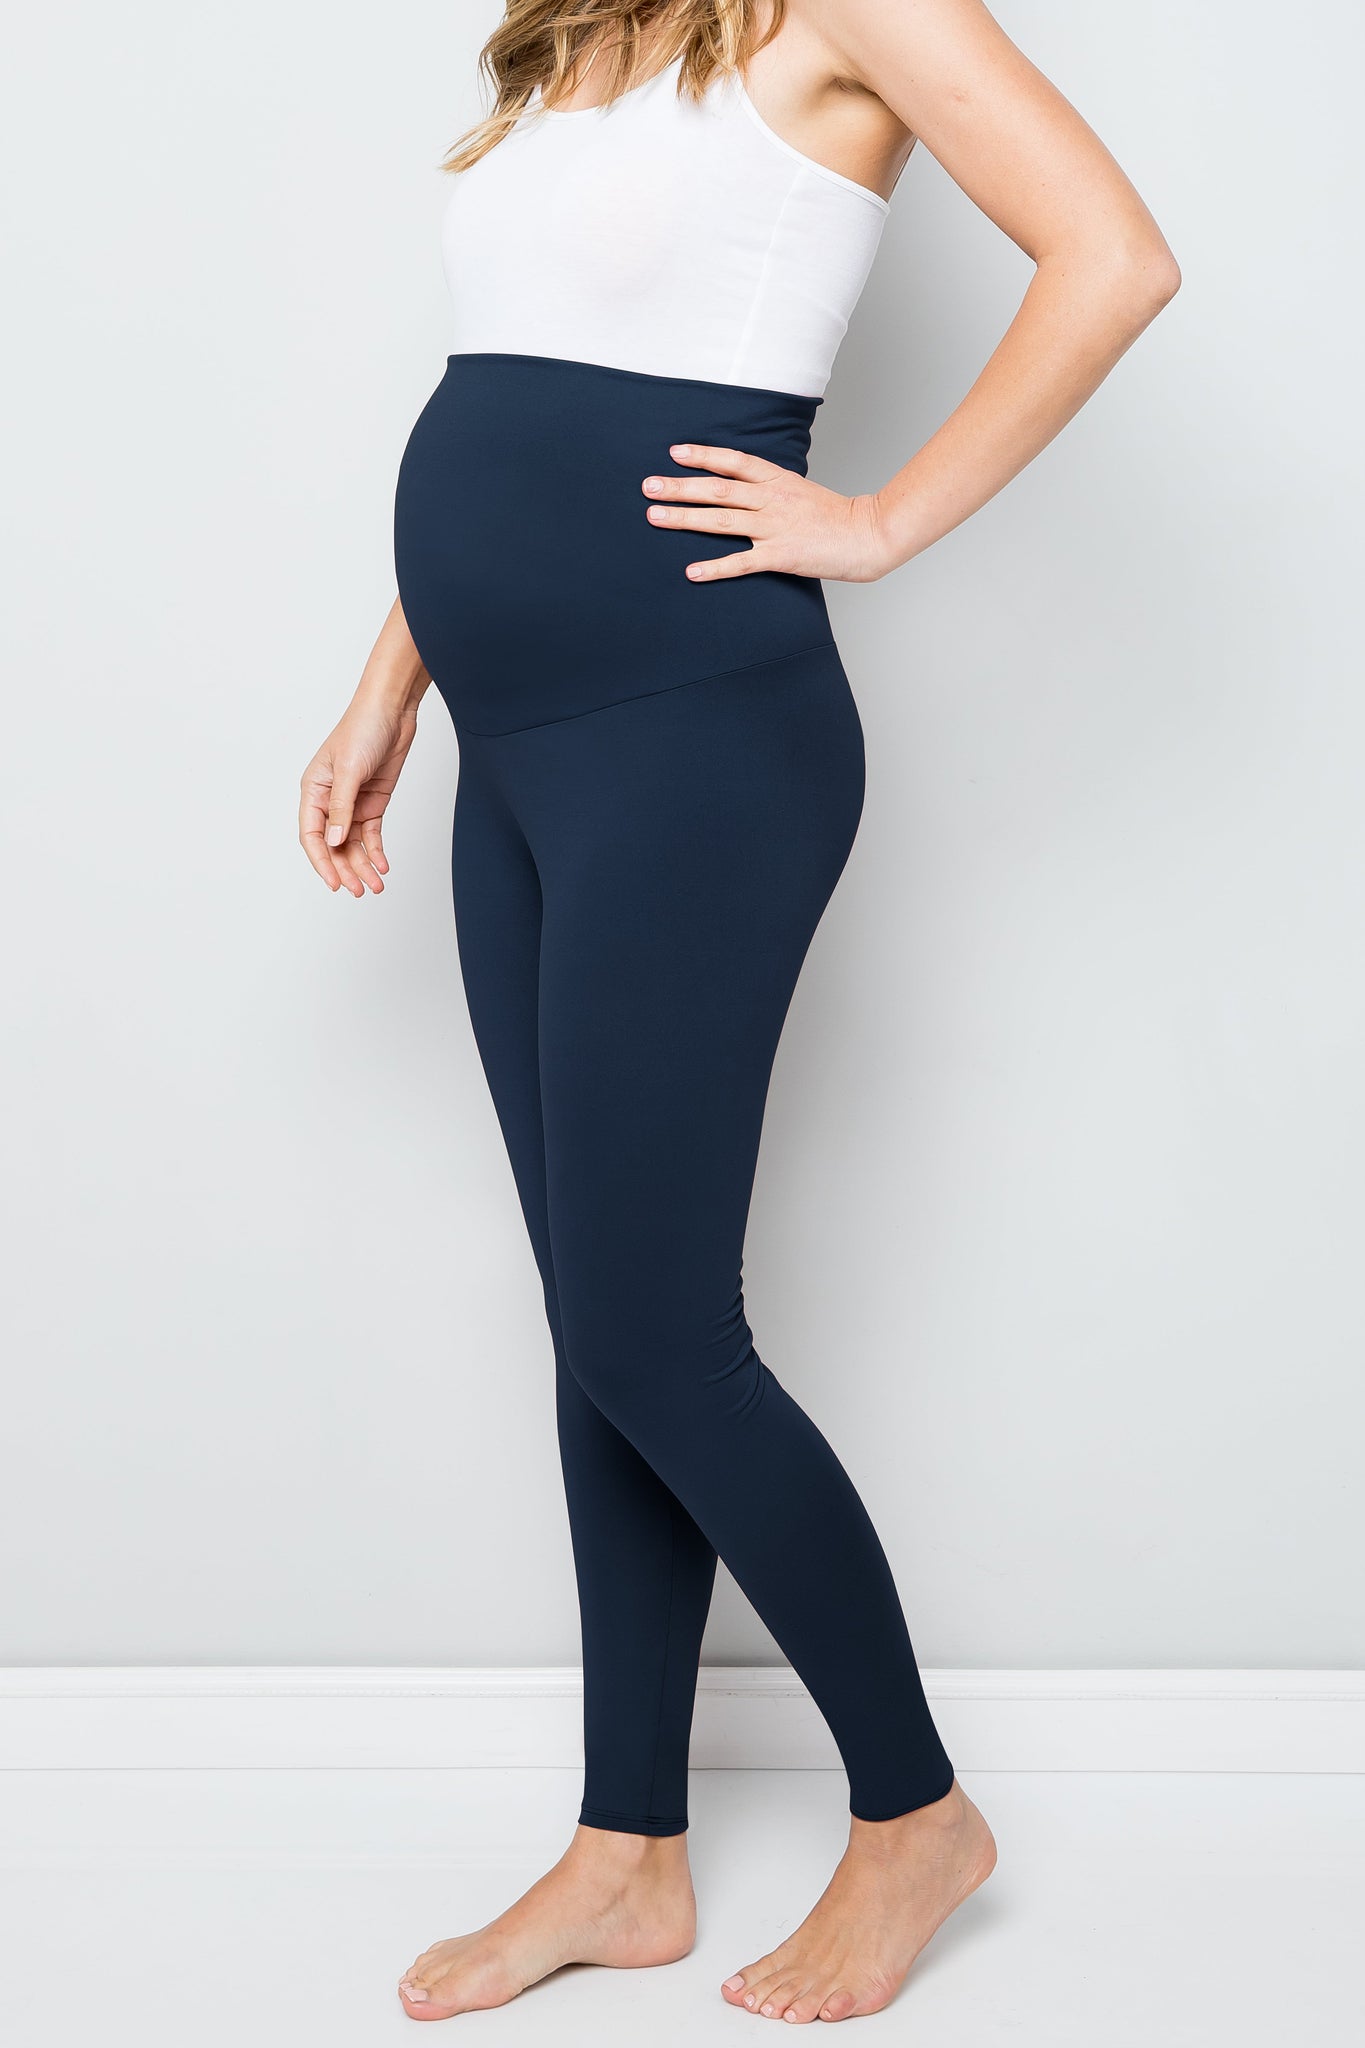 My Bump Buttery Ultra Soft Over the Belly Lounge Maternity Pants